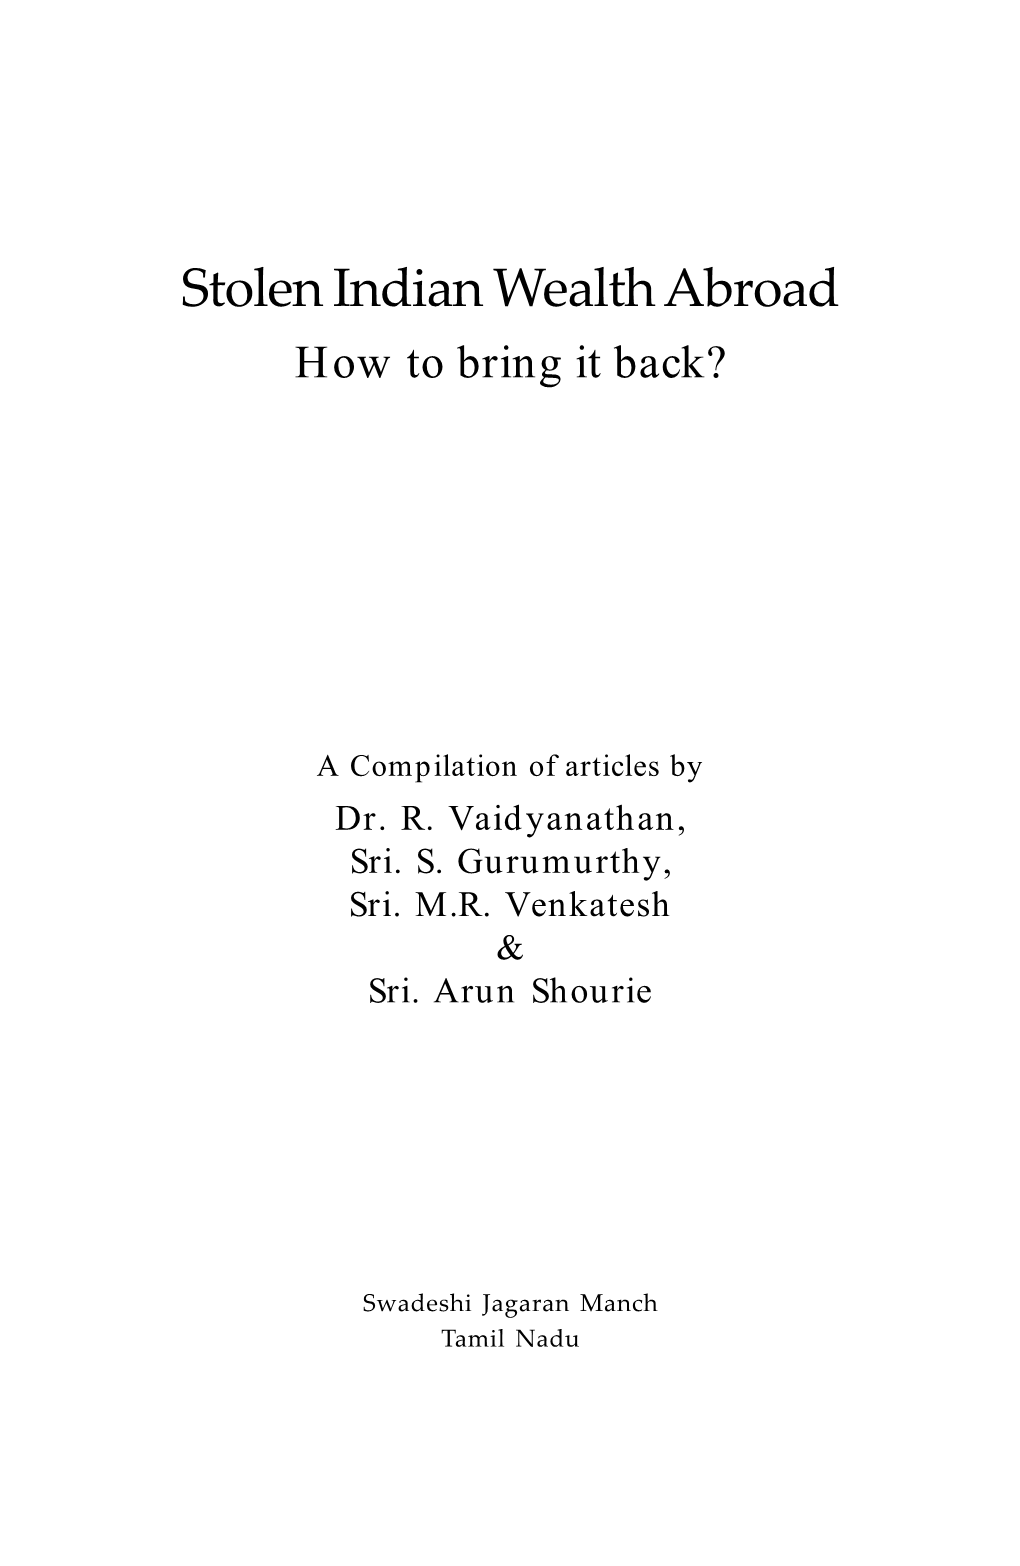 Stolen Indian Wealth Abroad How to Bring It Back?